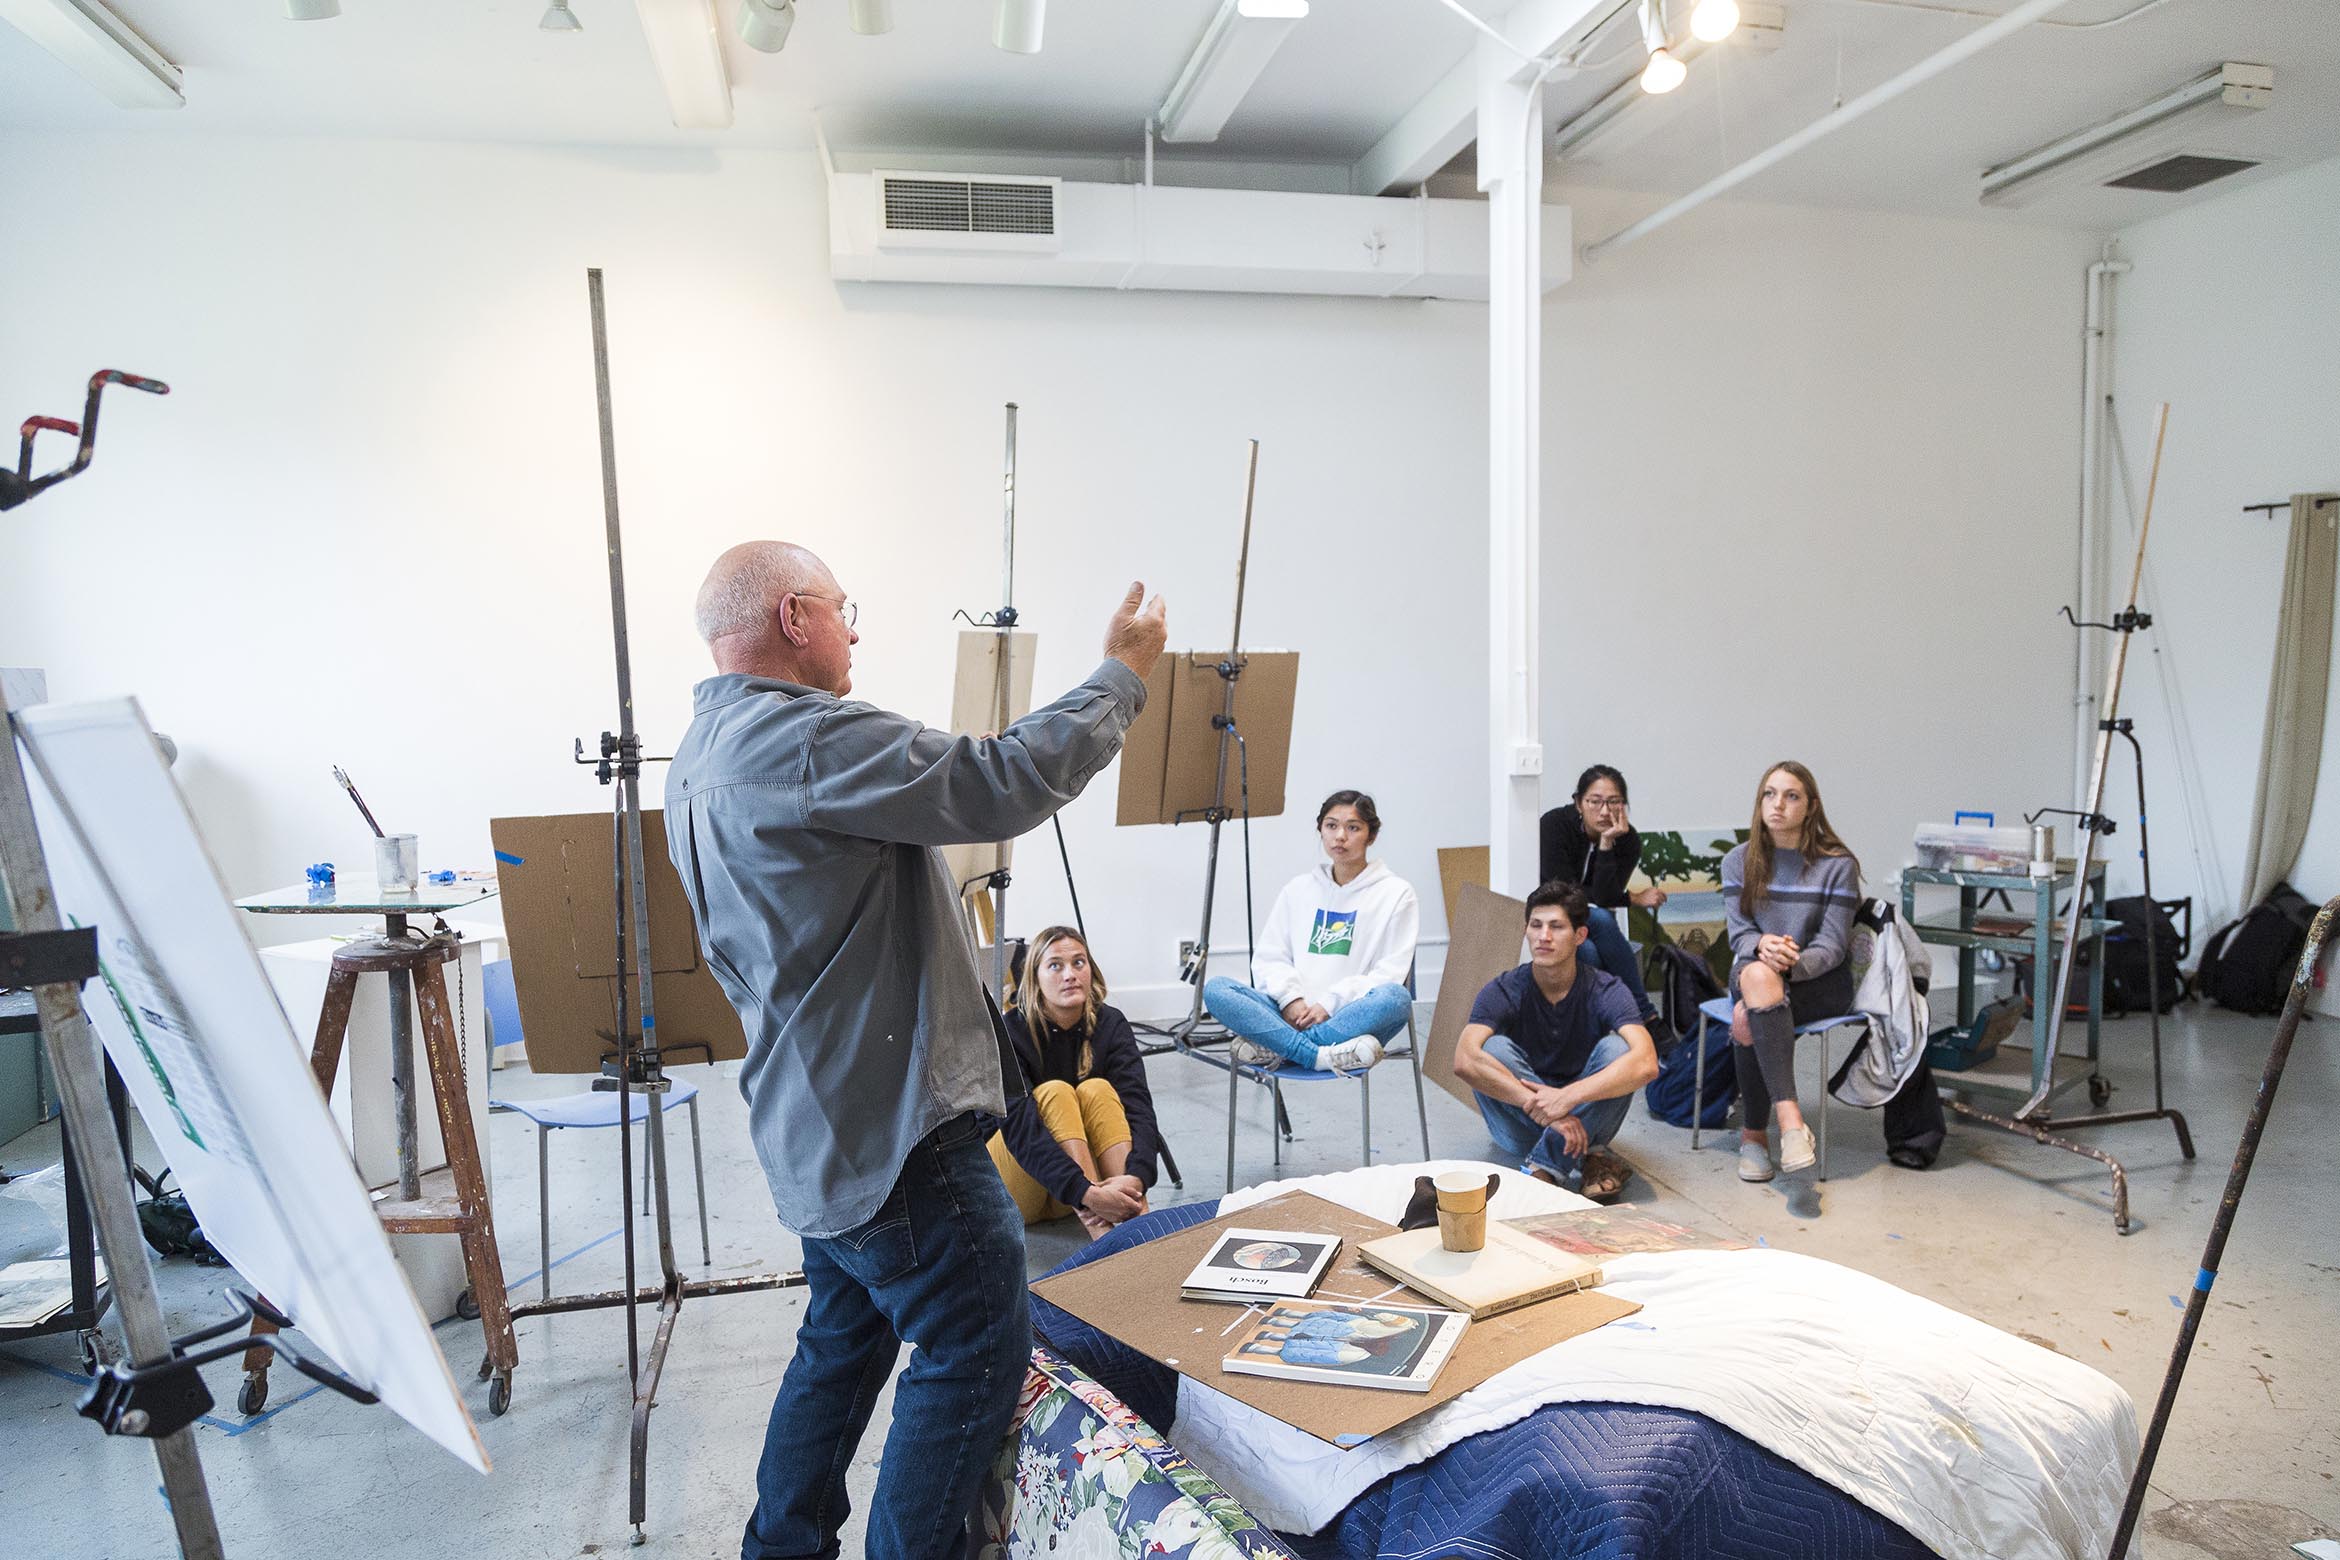 This is an art professor lecturing to his class in a studio.